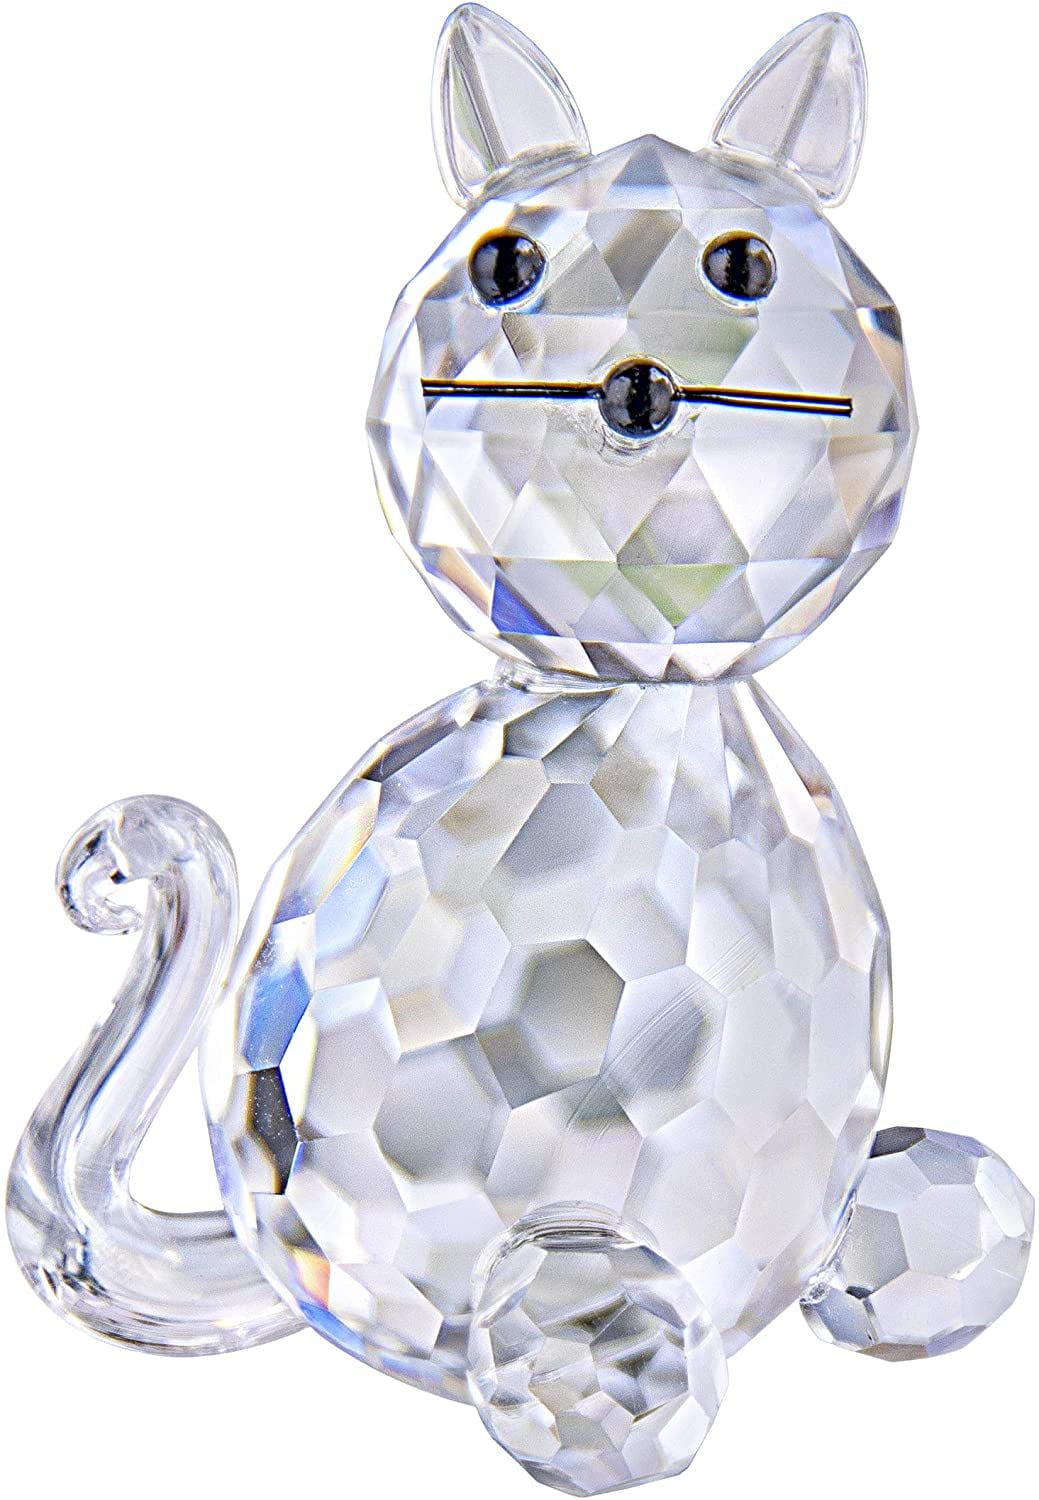 H&D Crystal Animals Squirrel Collectible Figurine & Crystal Cute Elephant Cut Glass Ornament Decor Table Centerpiece